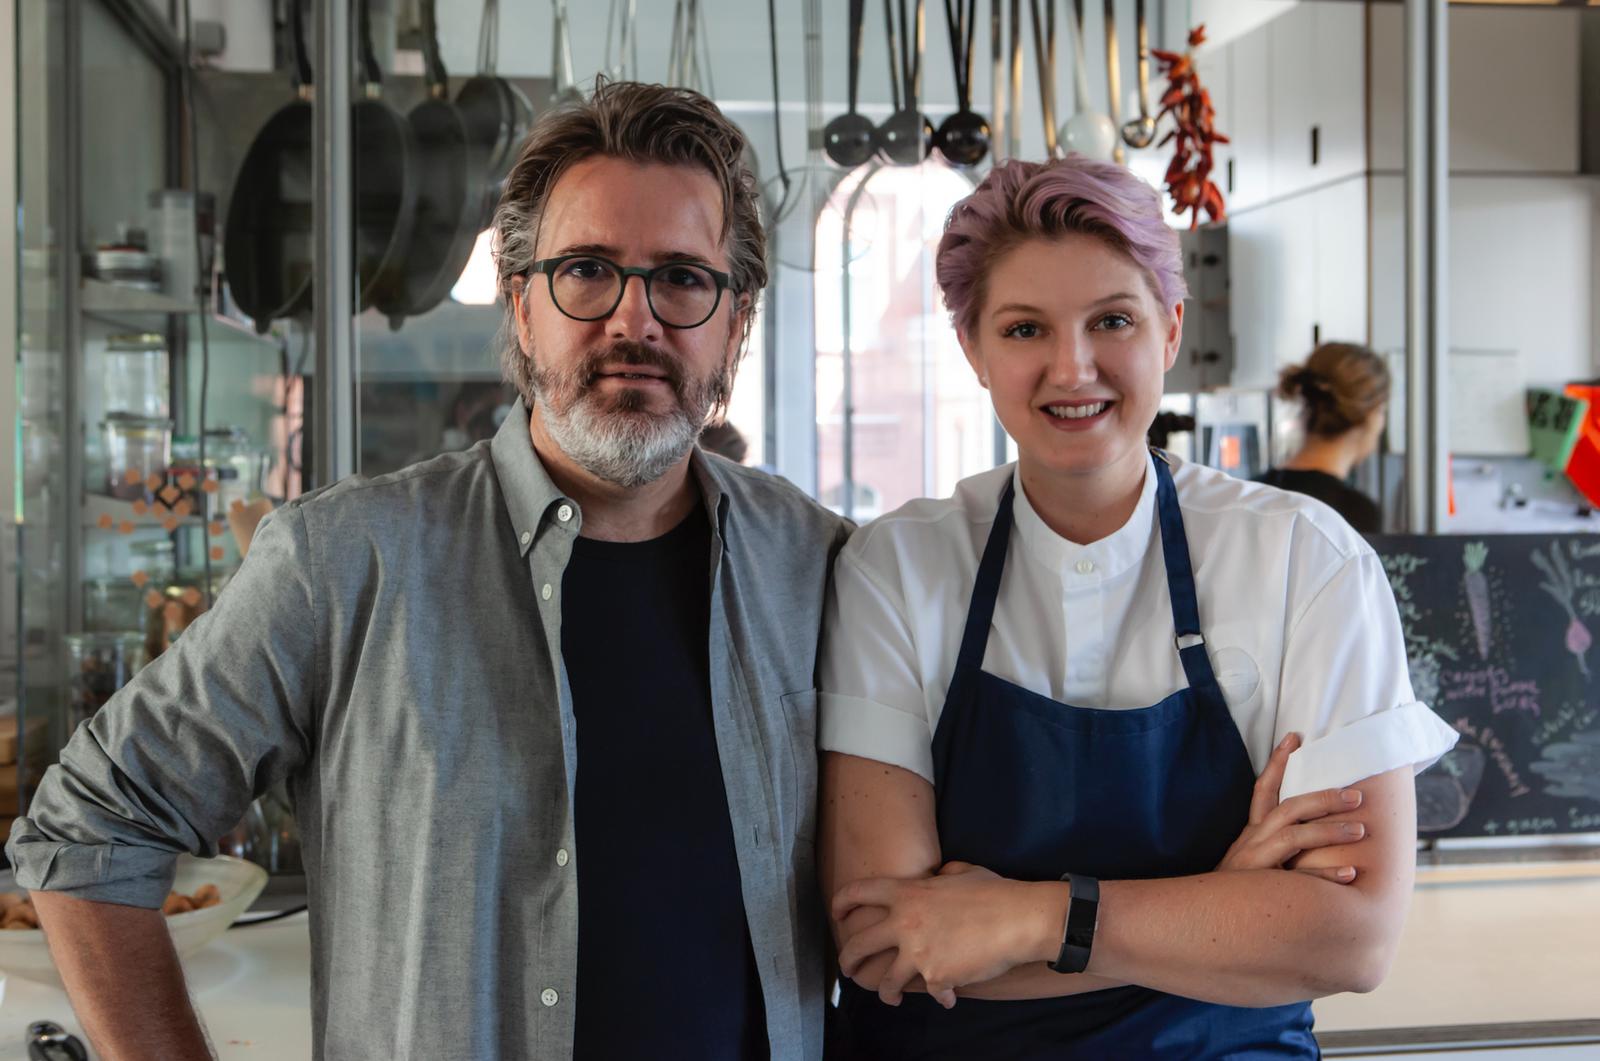 Olafur Eliasson is opening a pop-up restaurant in Iceland